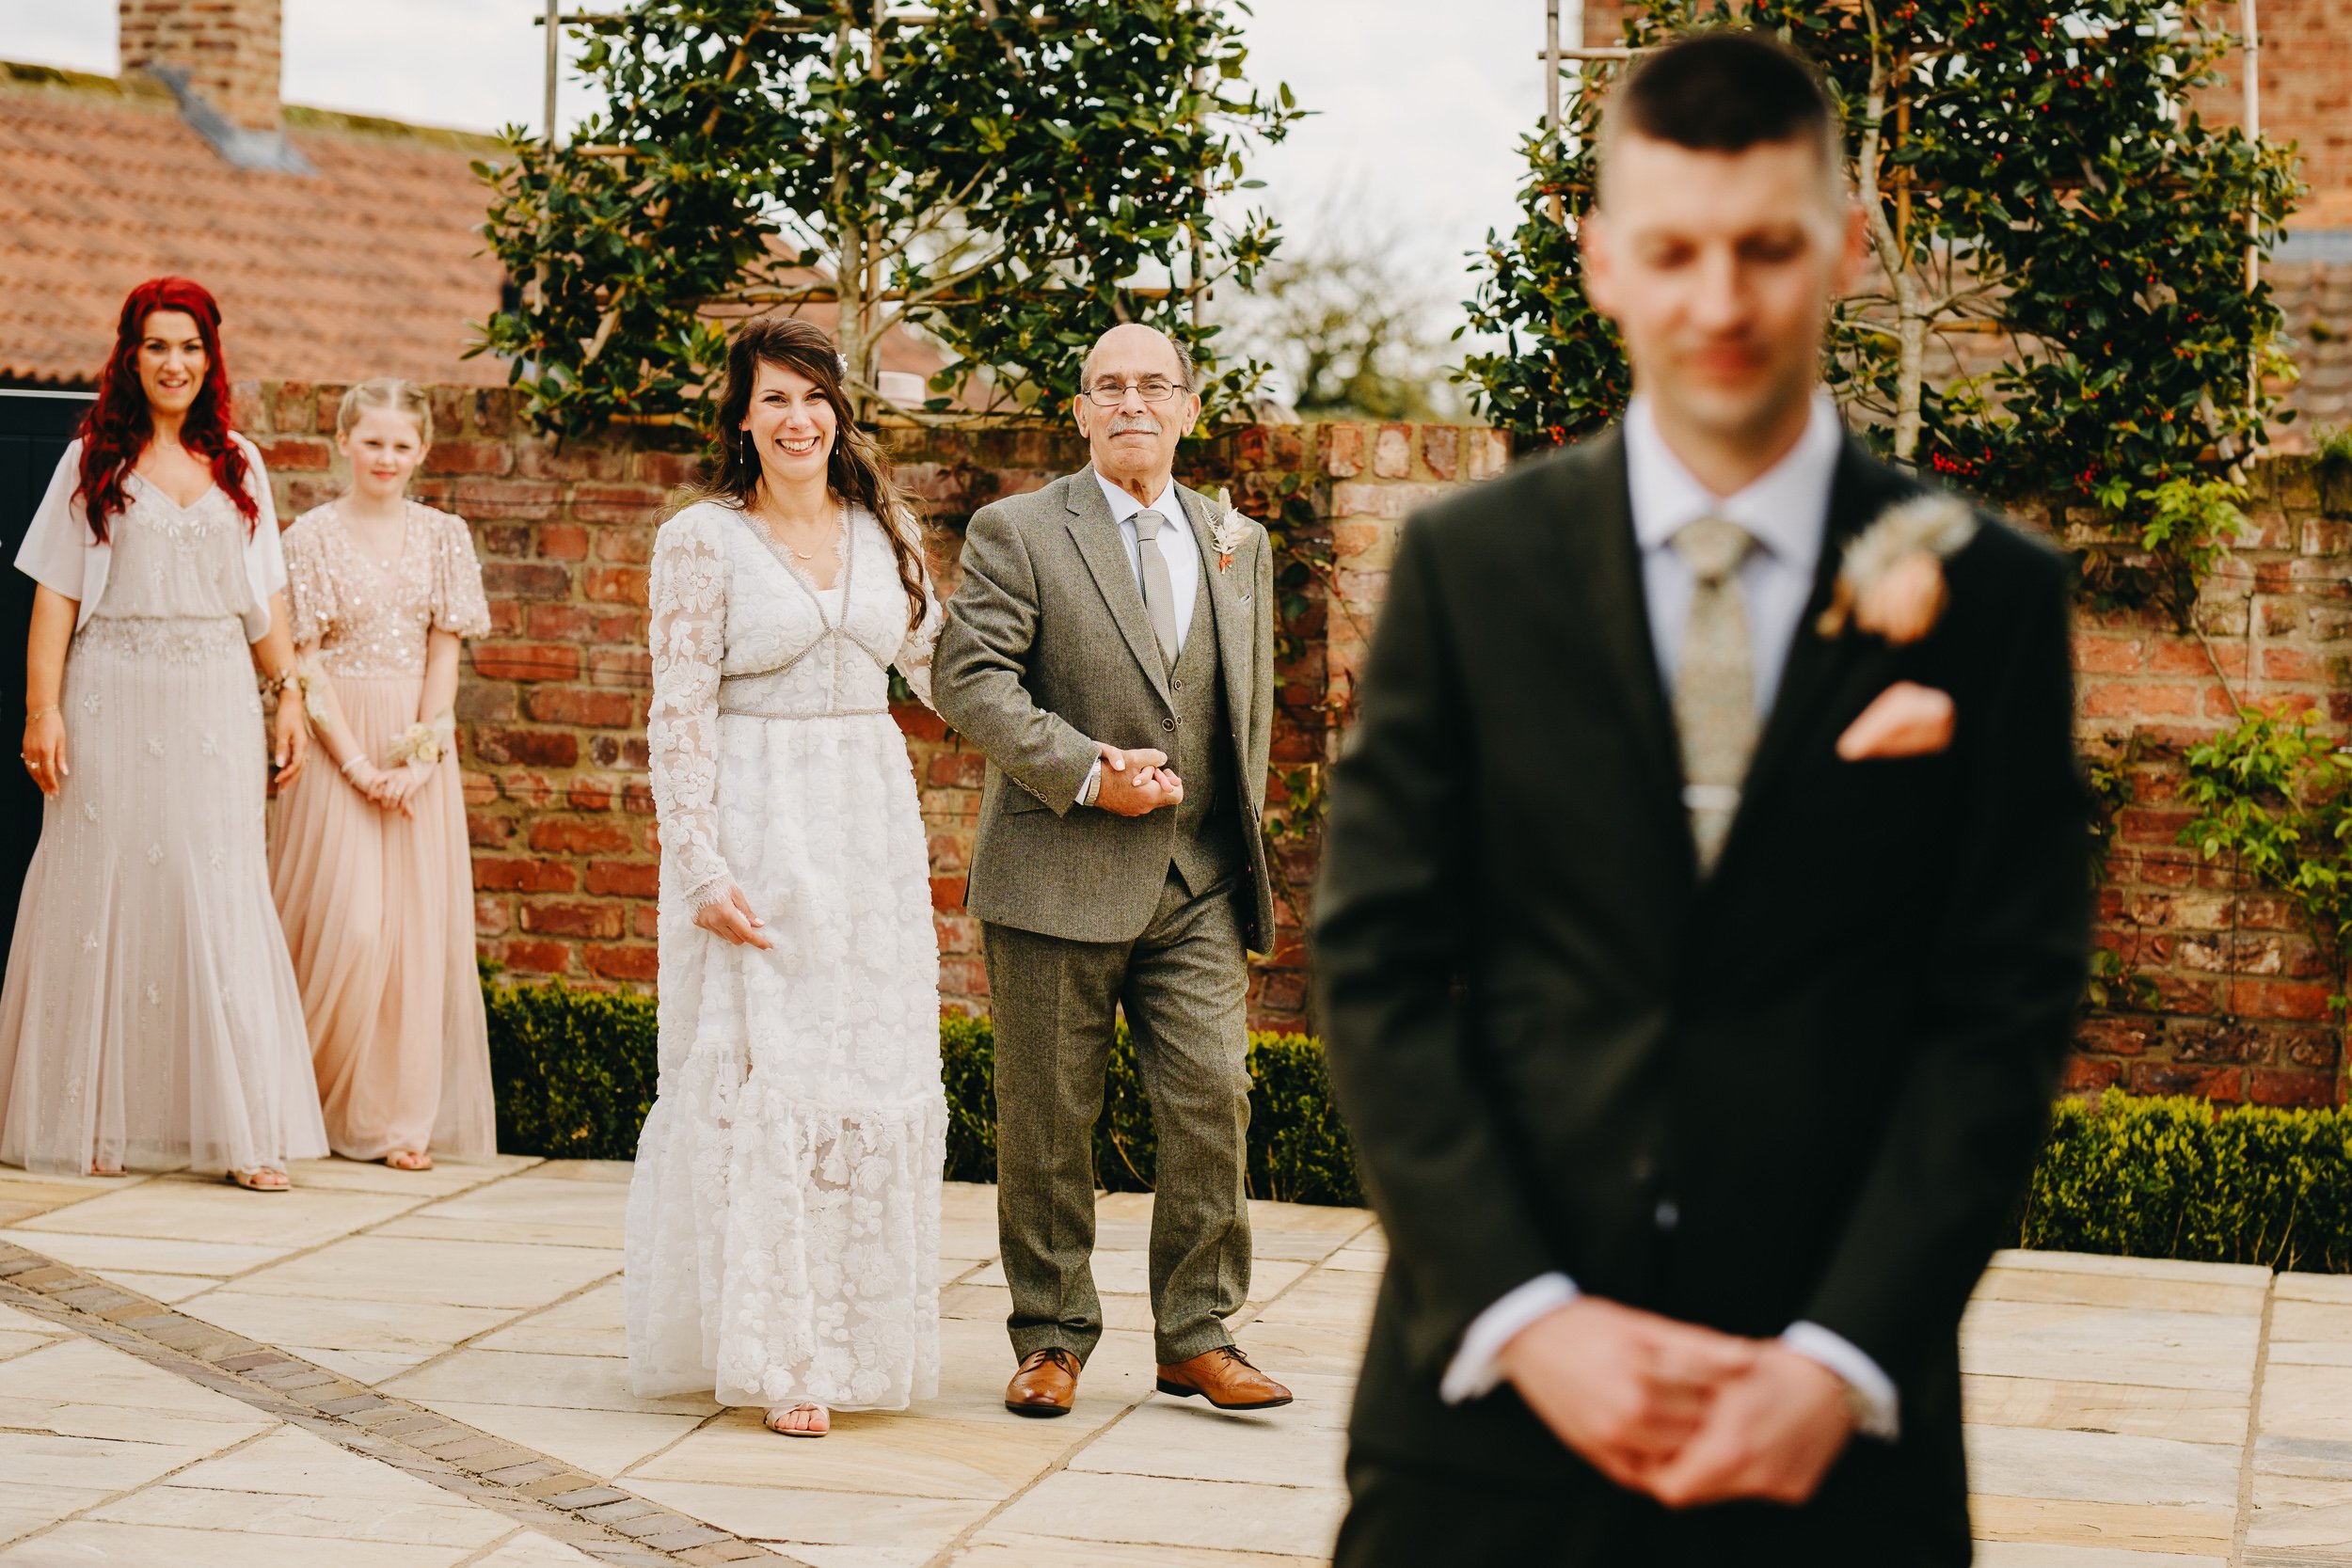 First look between bride and groom at Thirsk Lodge Barns